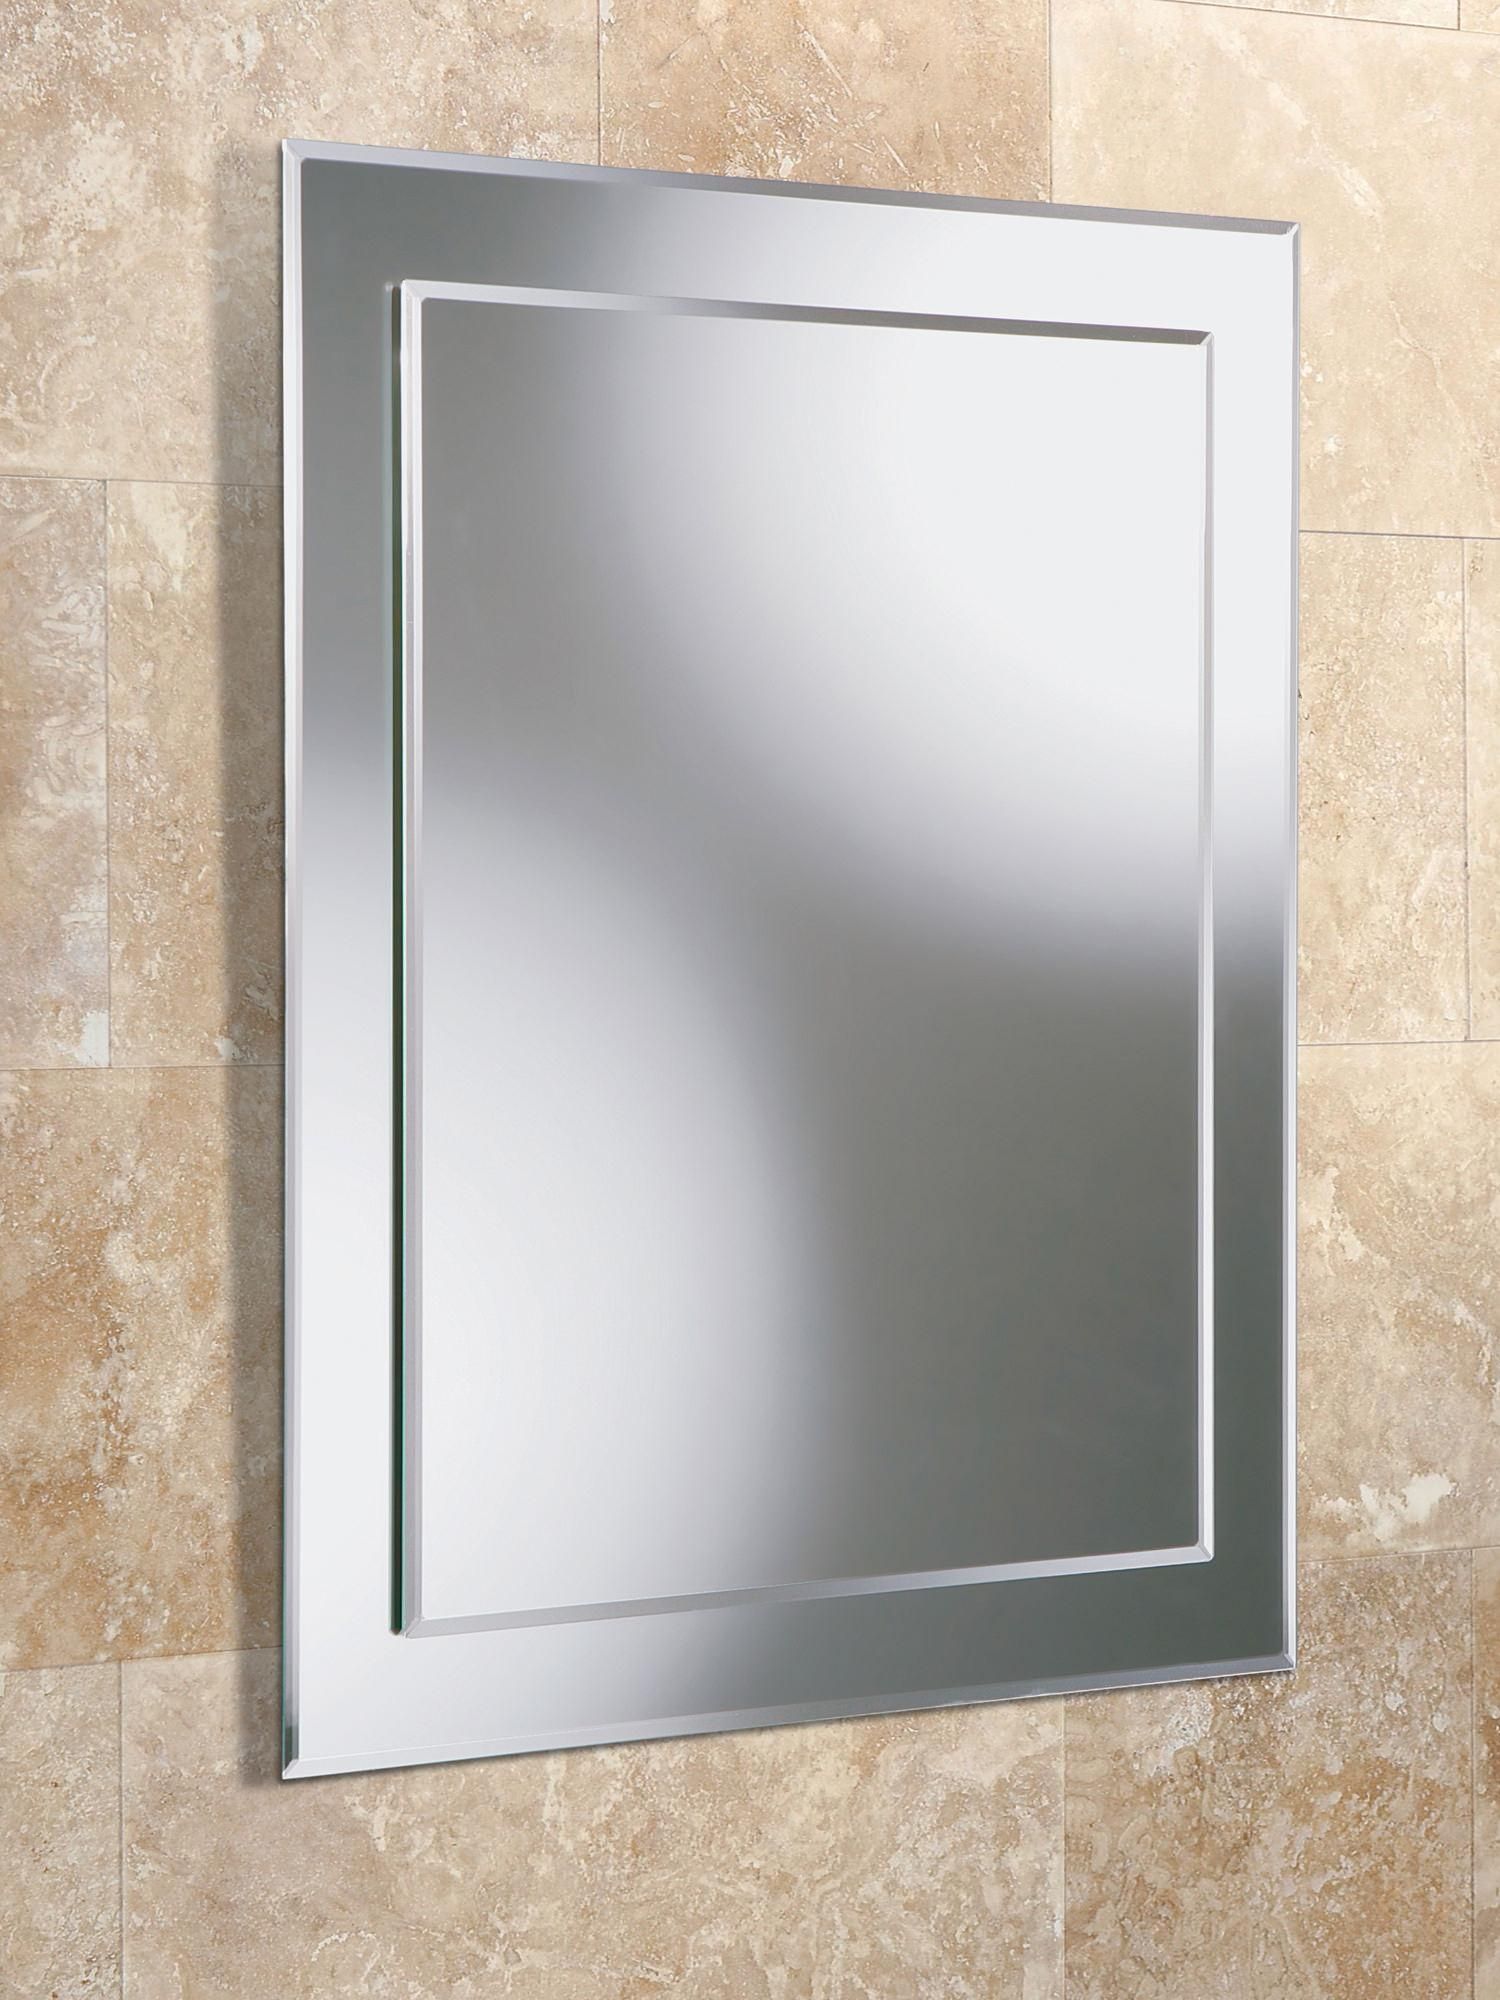 Hib Olivia Rectangular Bevelled Mirror On Mirror 400 X 600Mm Throughout Bevelled Bathroom Mirrors (View 9 of 20)